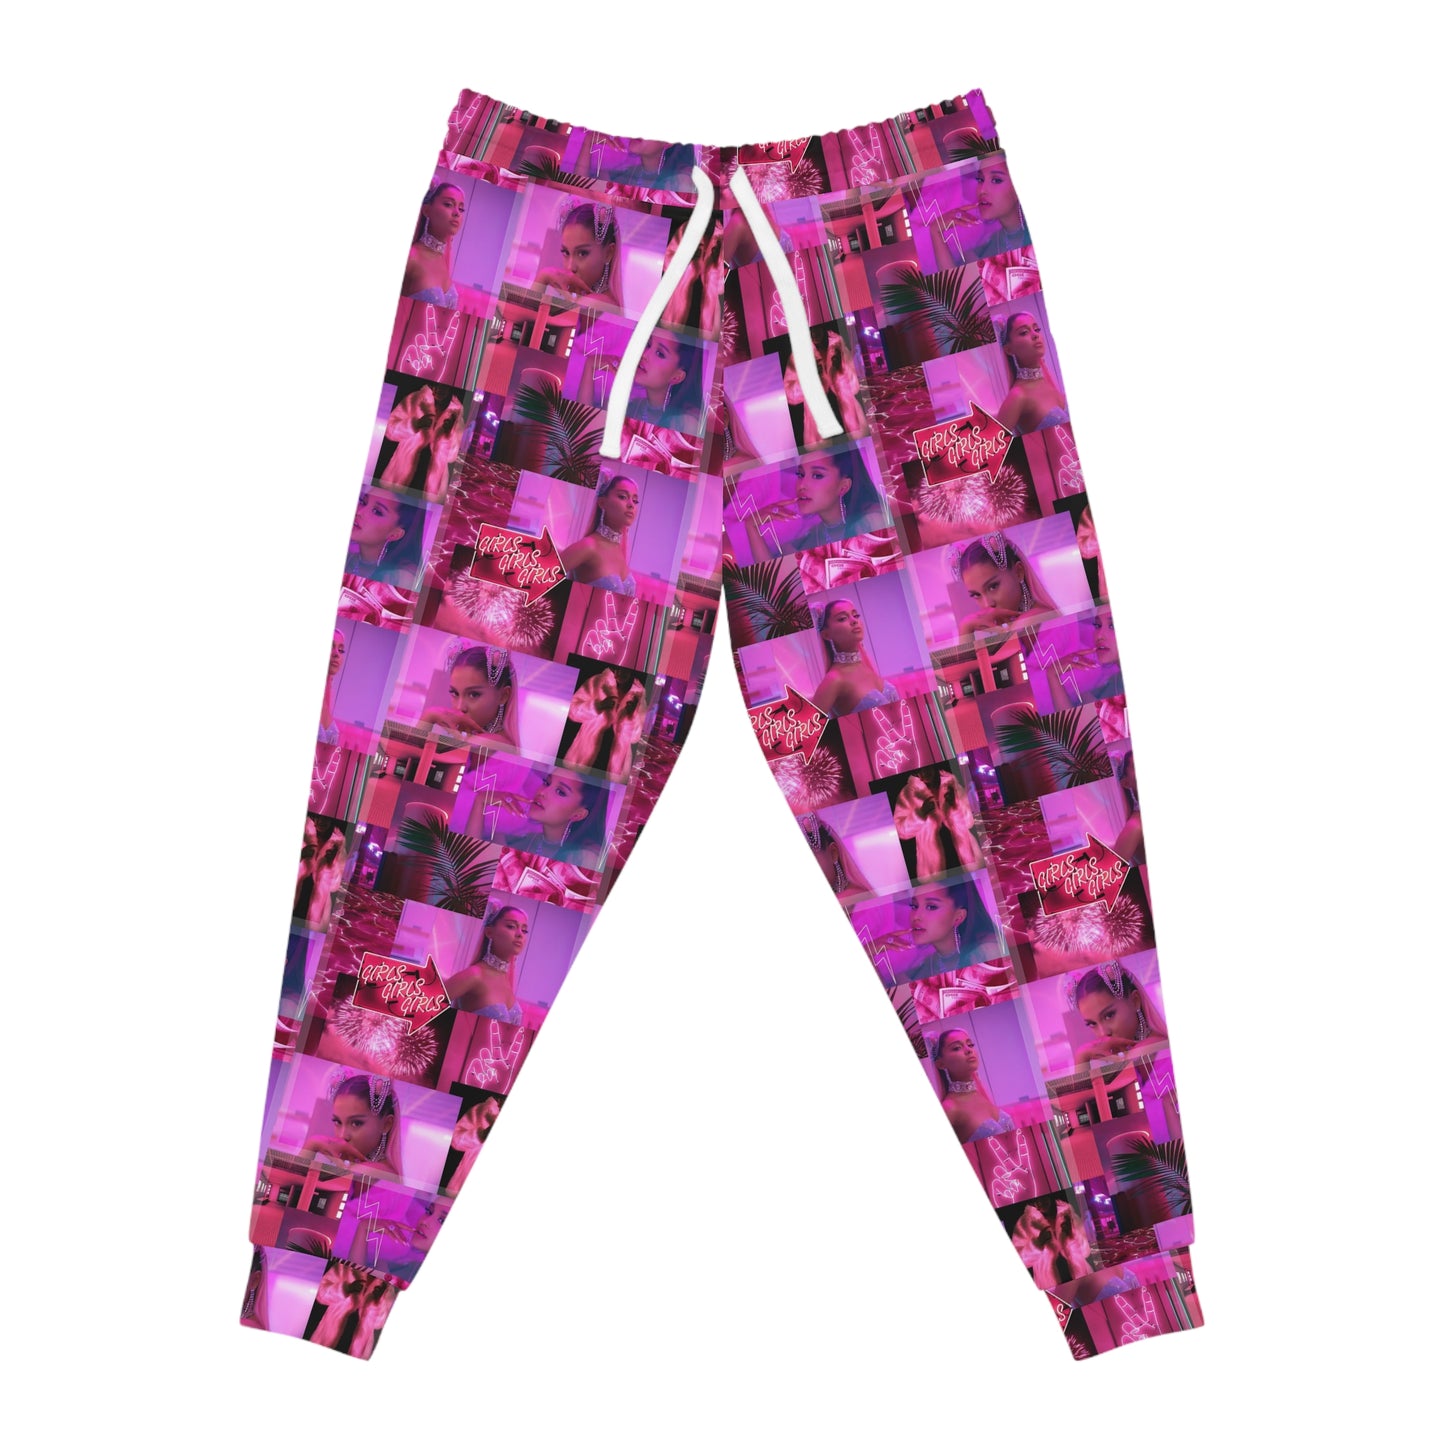 Ariana Grande 7 Rings Collage Athletic Jogger Sweatpants